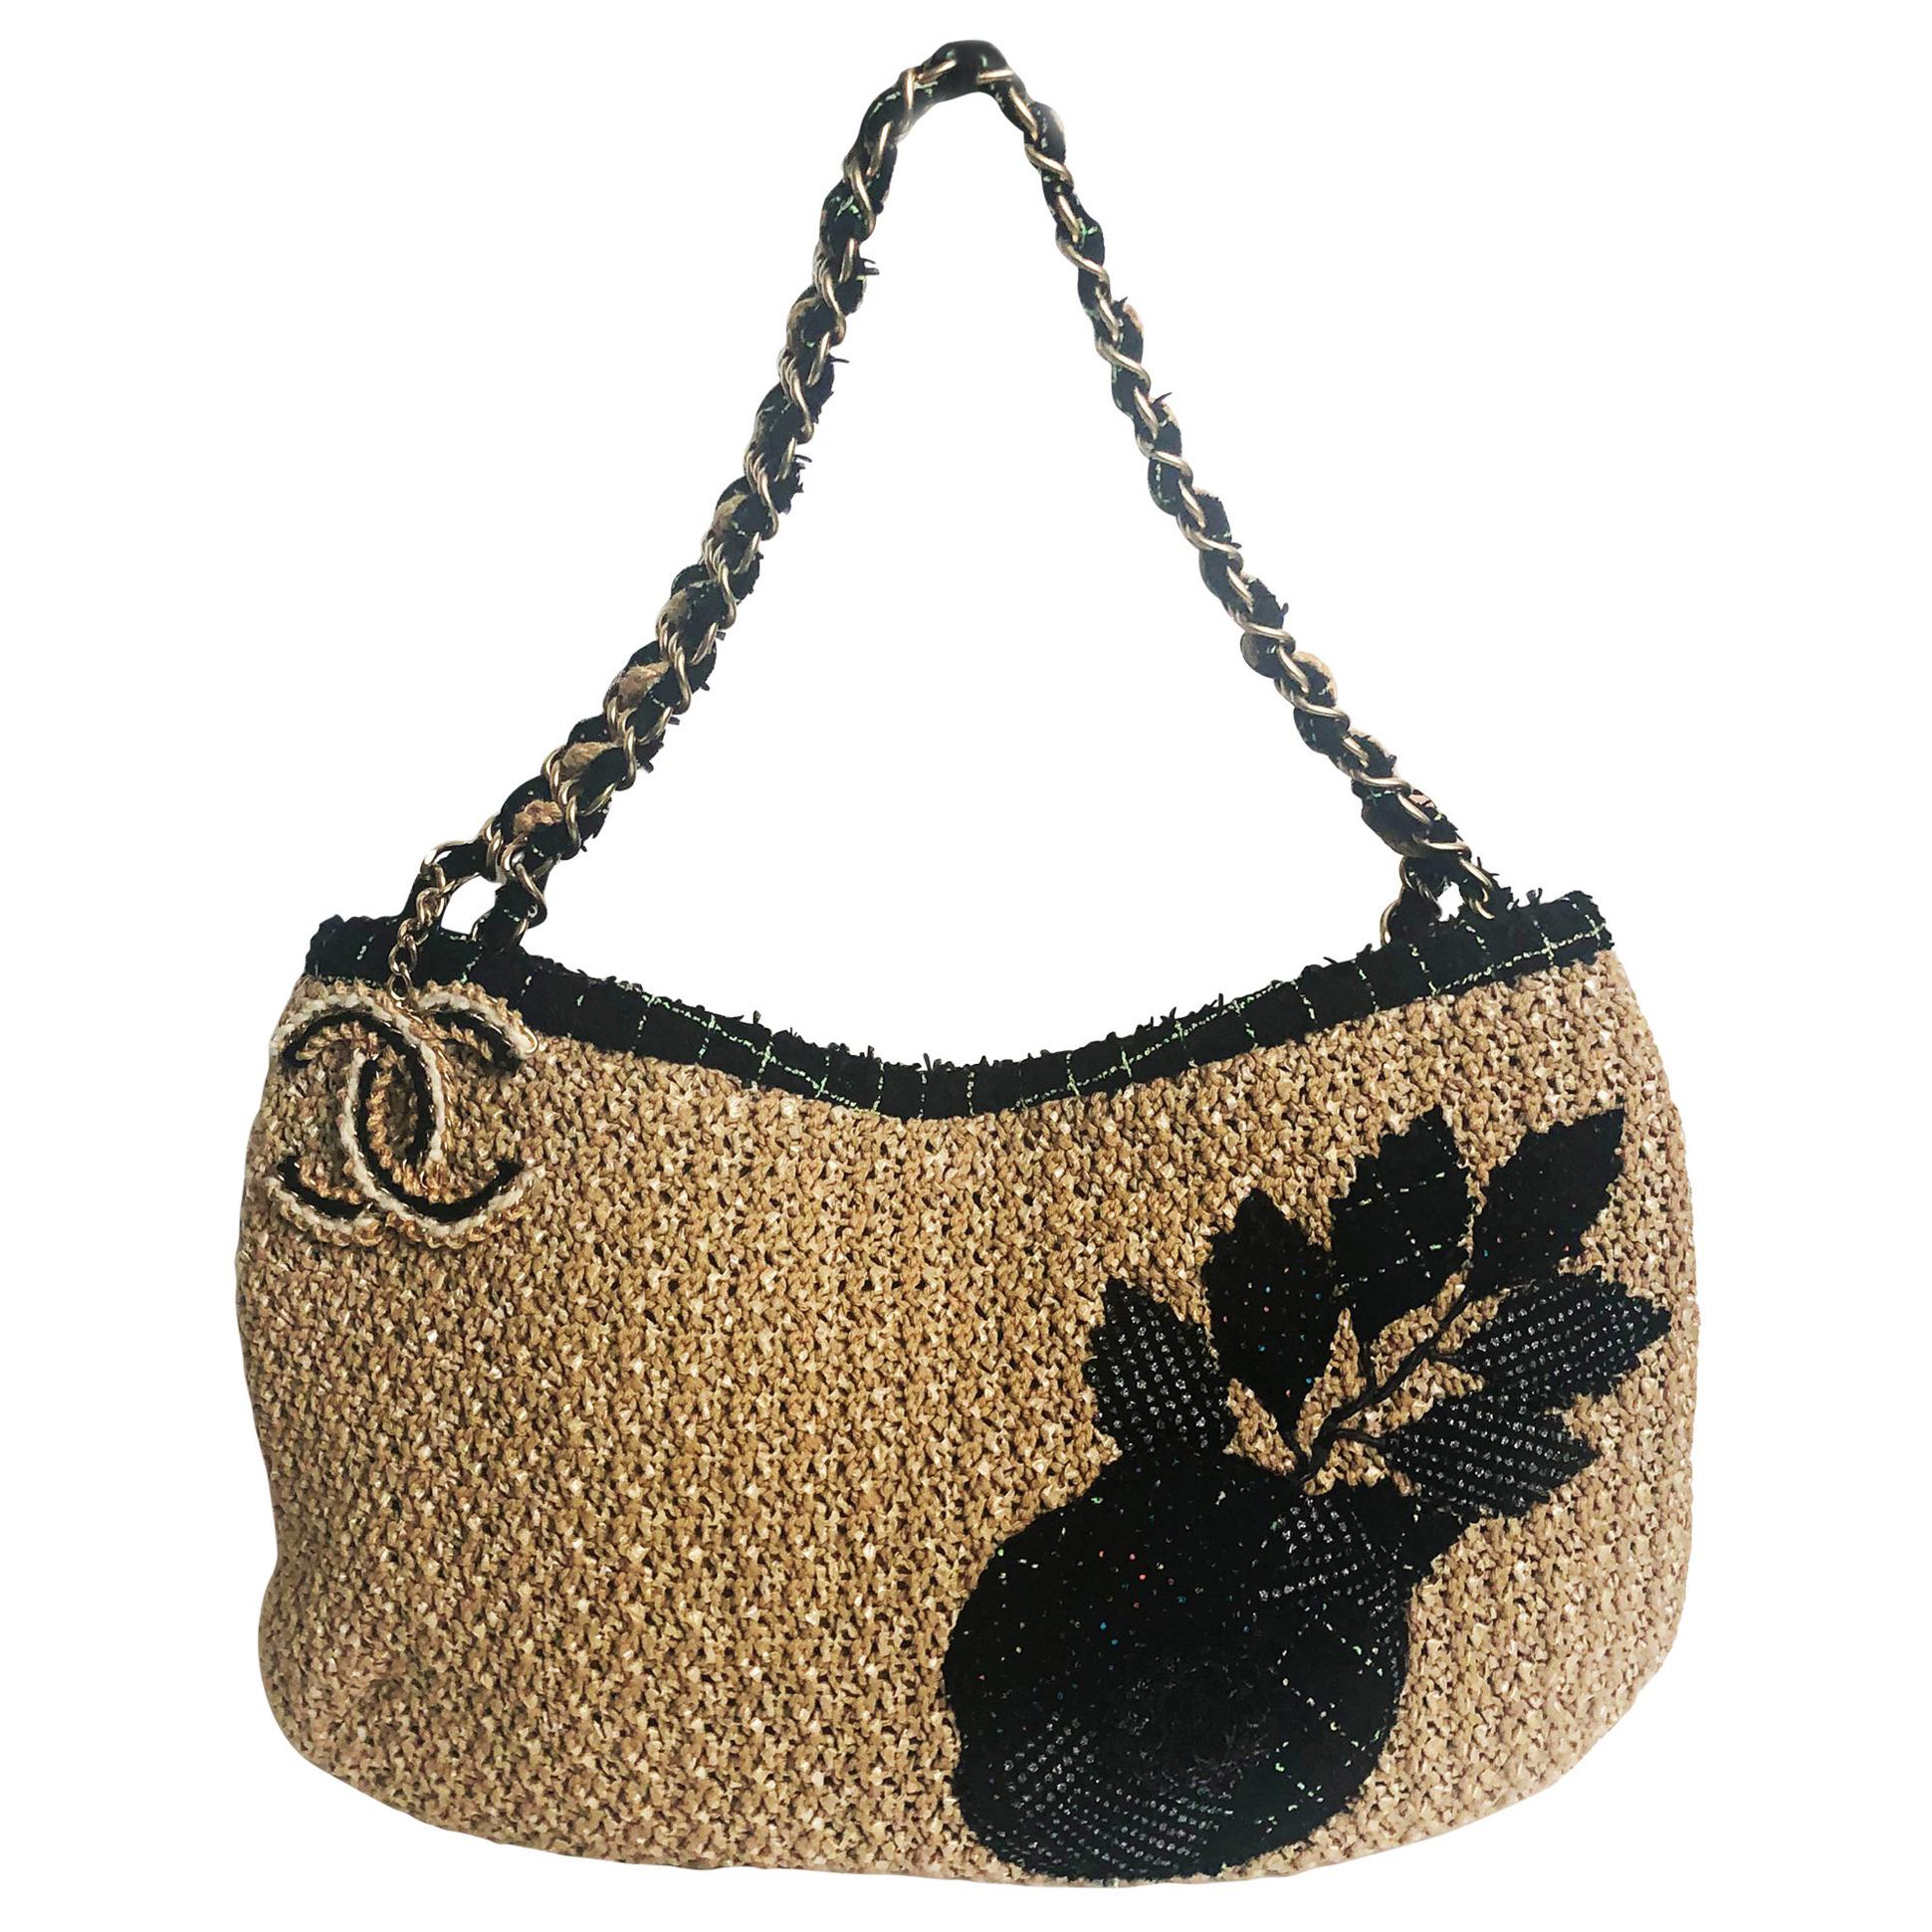 Chanel Coco Country Camellia Bag Woven Straw Tote 2010 Collection 